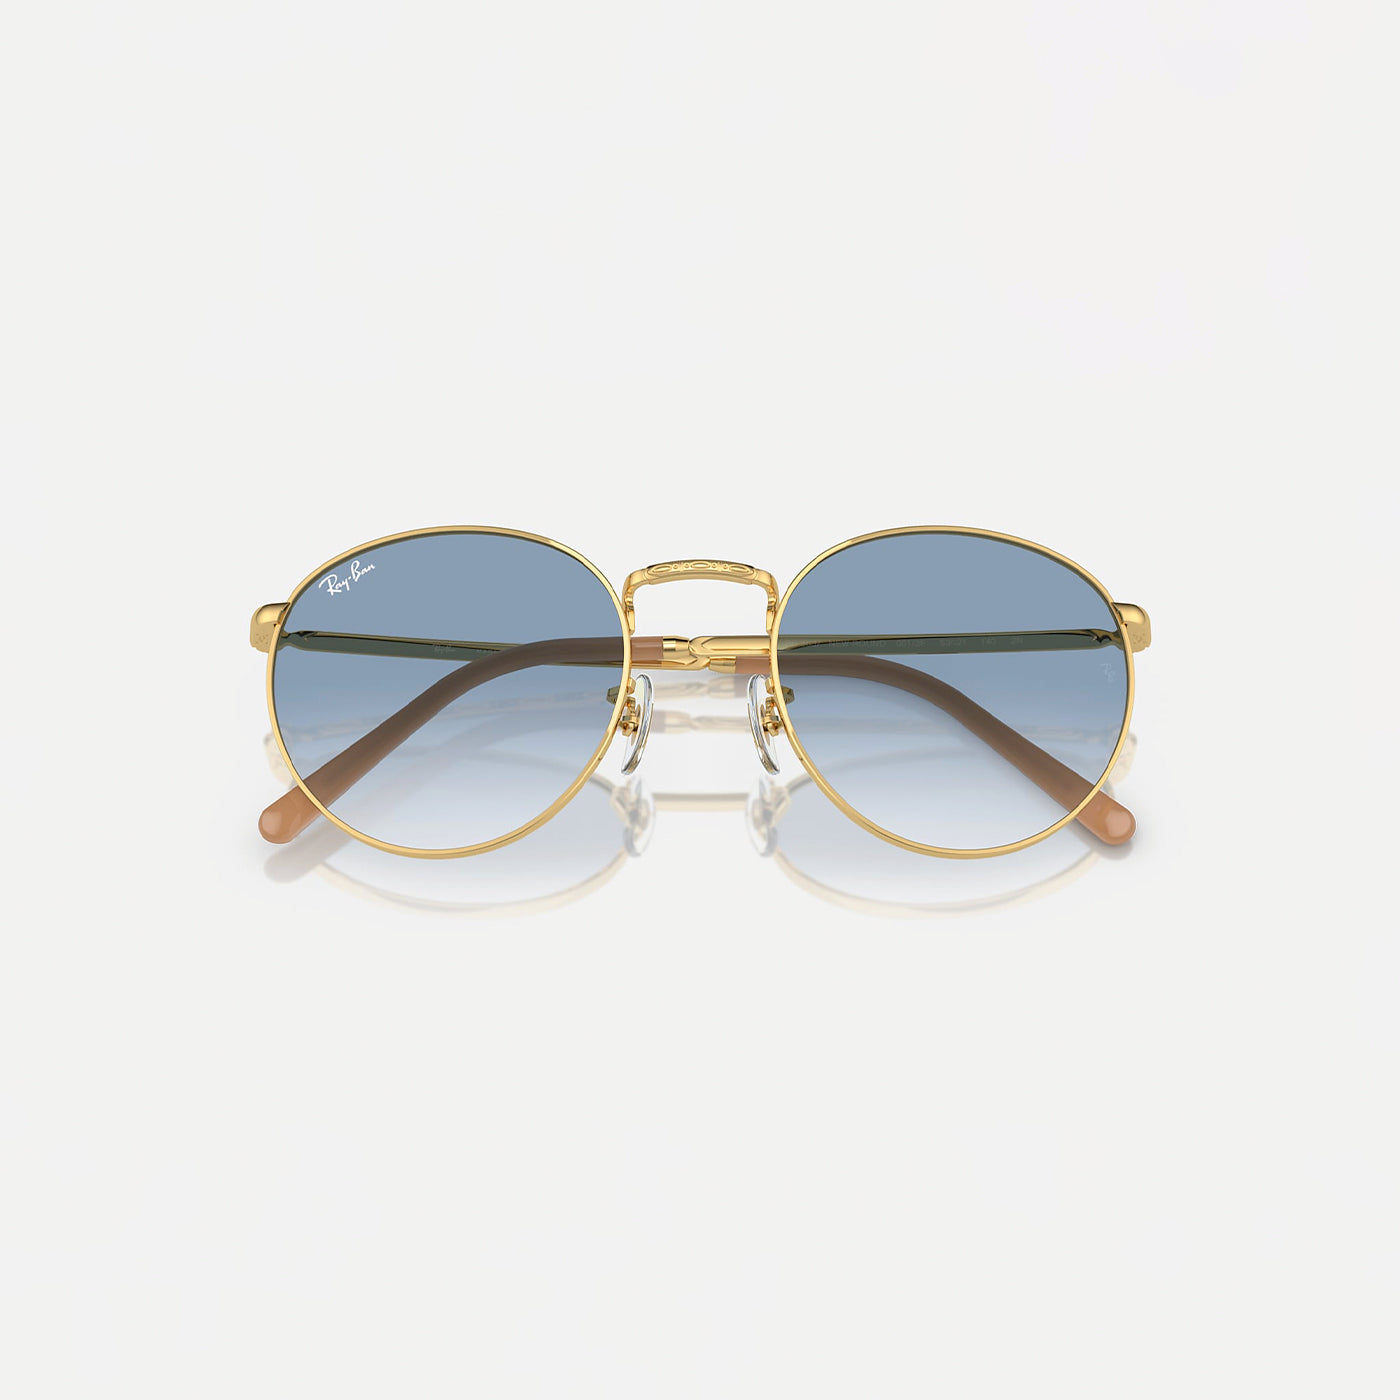 Ray-Ban - New Round RB3637 - Arista Gold Frame / Blue Gradient Lens - 50